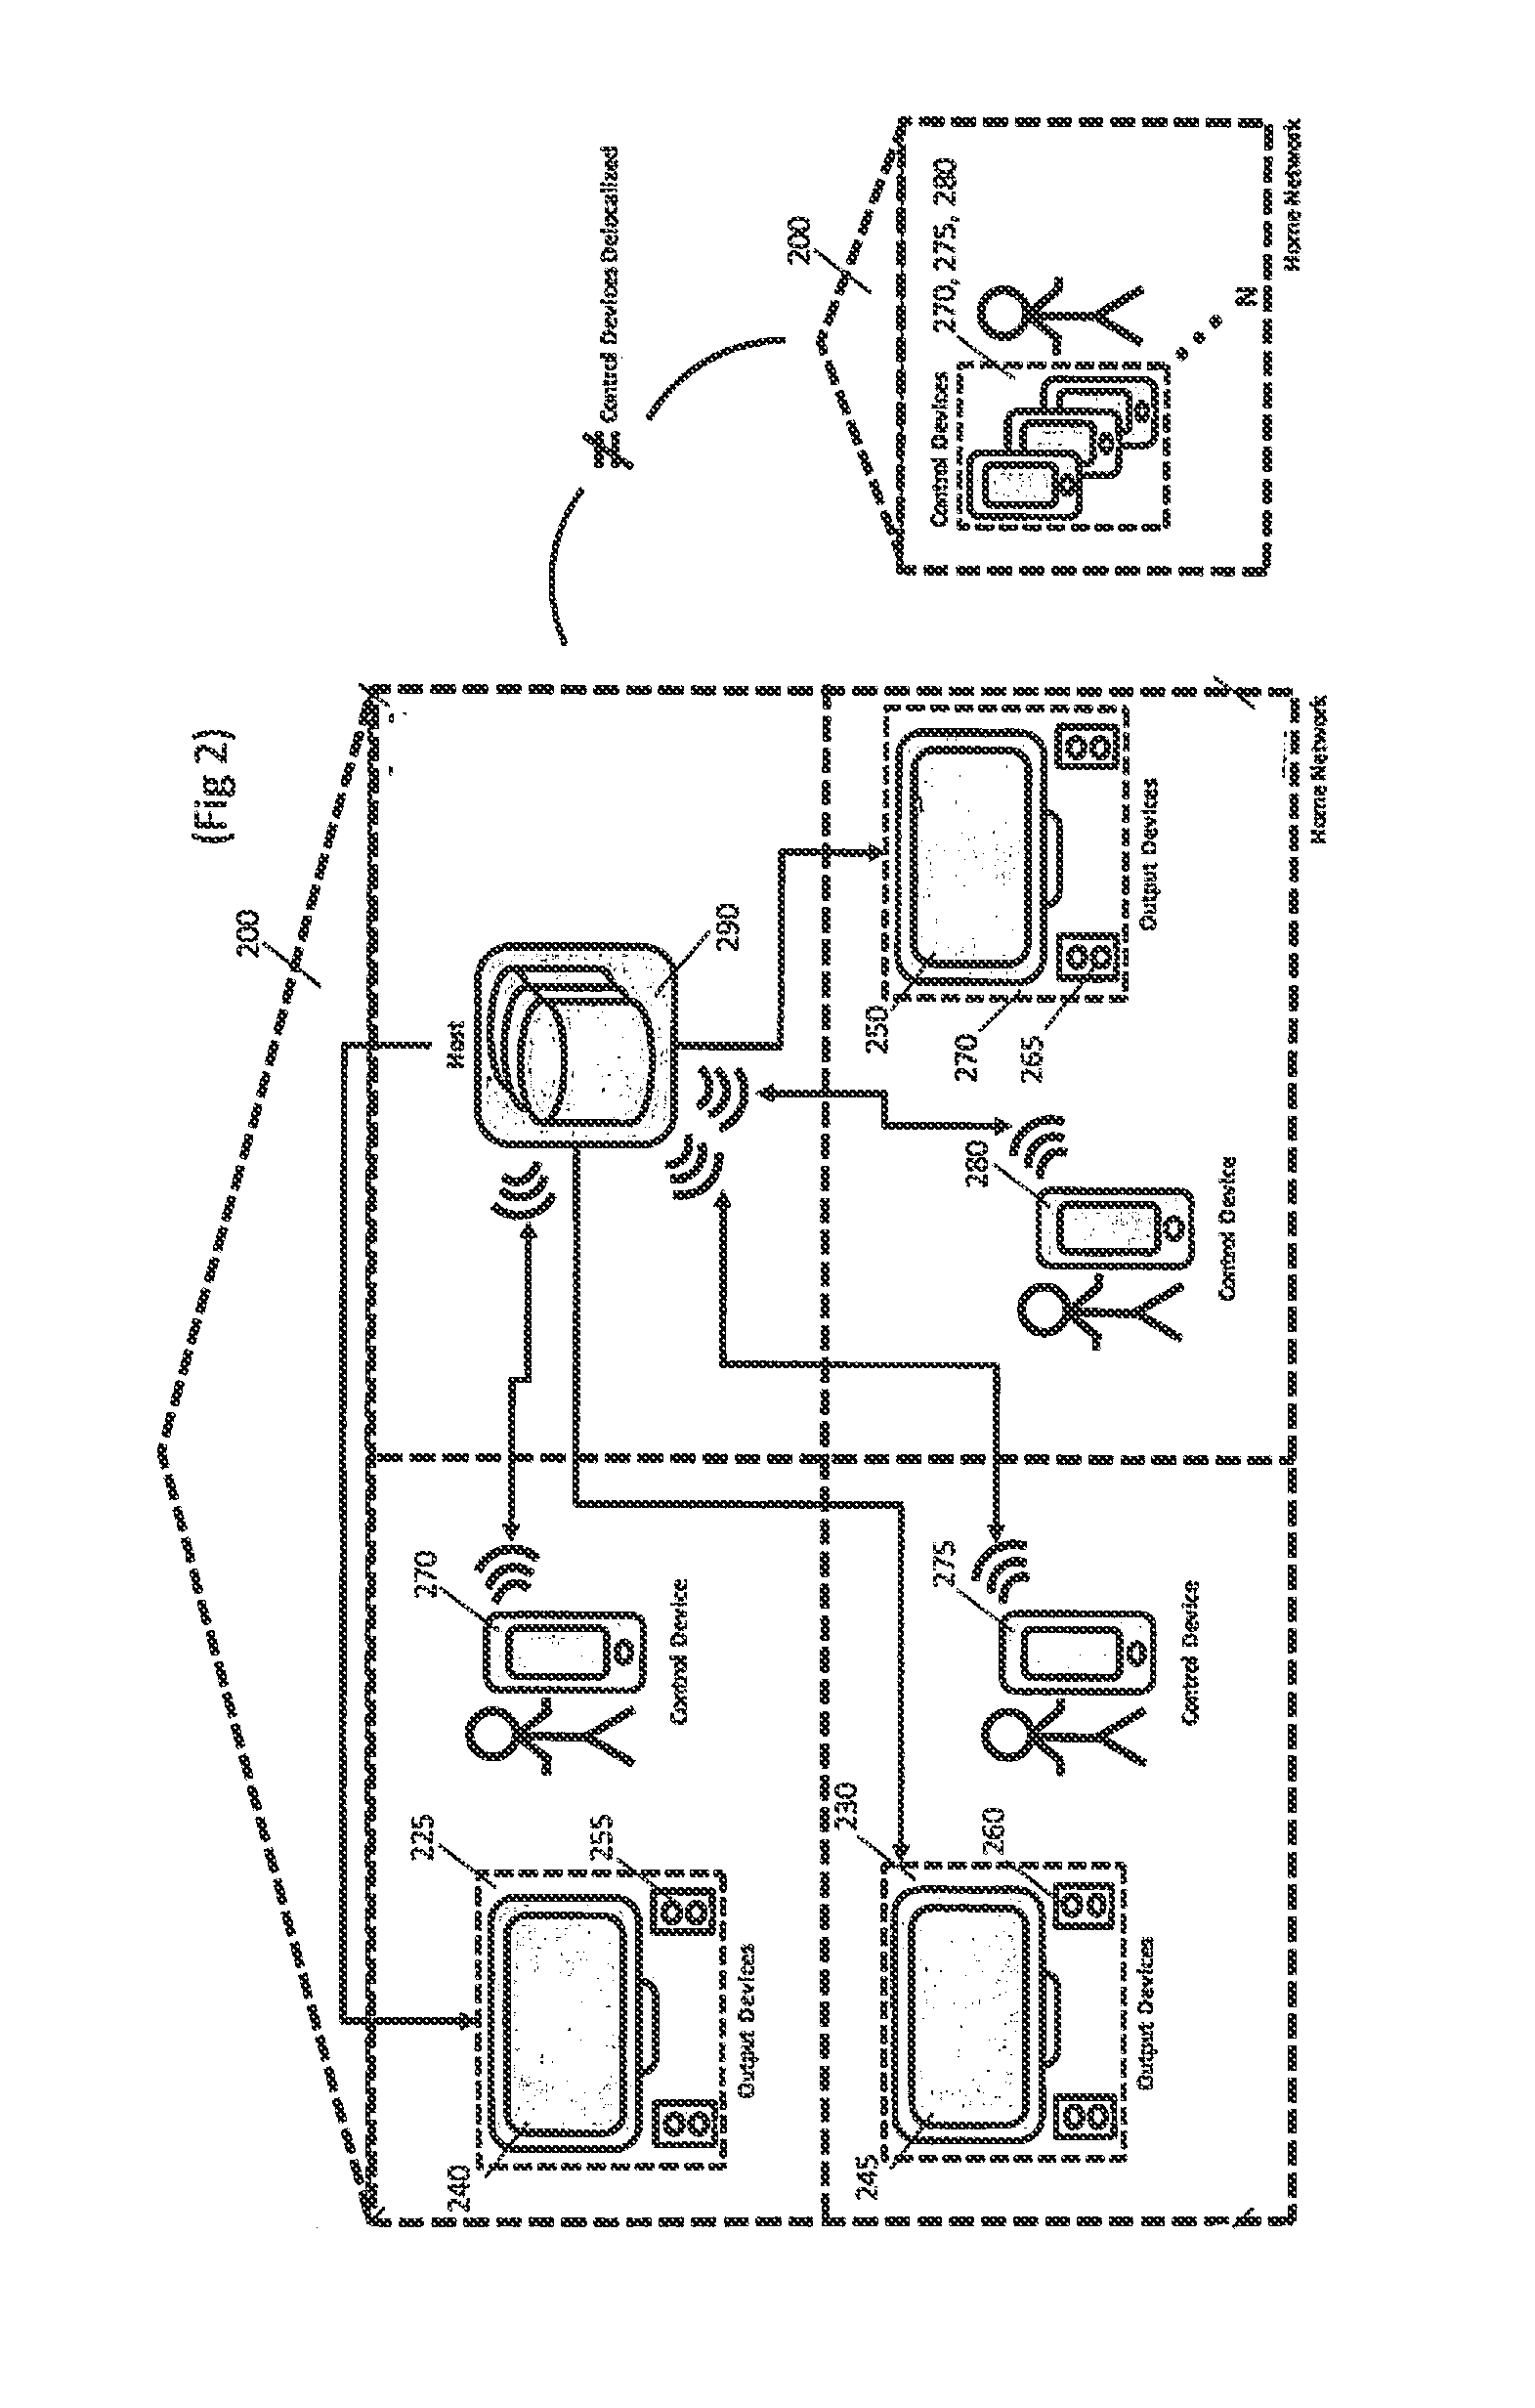 Method and system for providing digital content